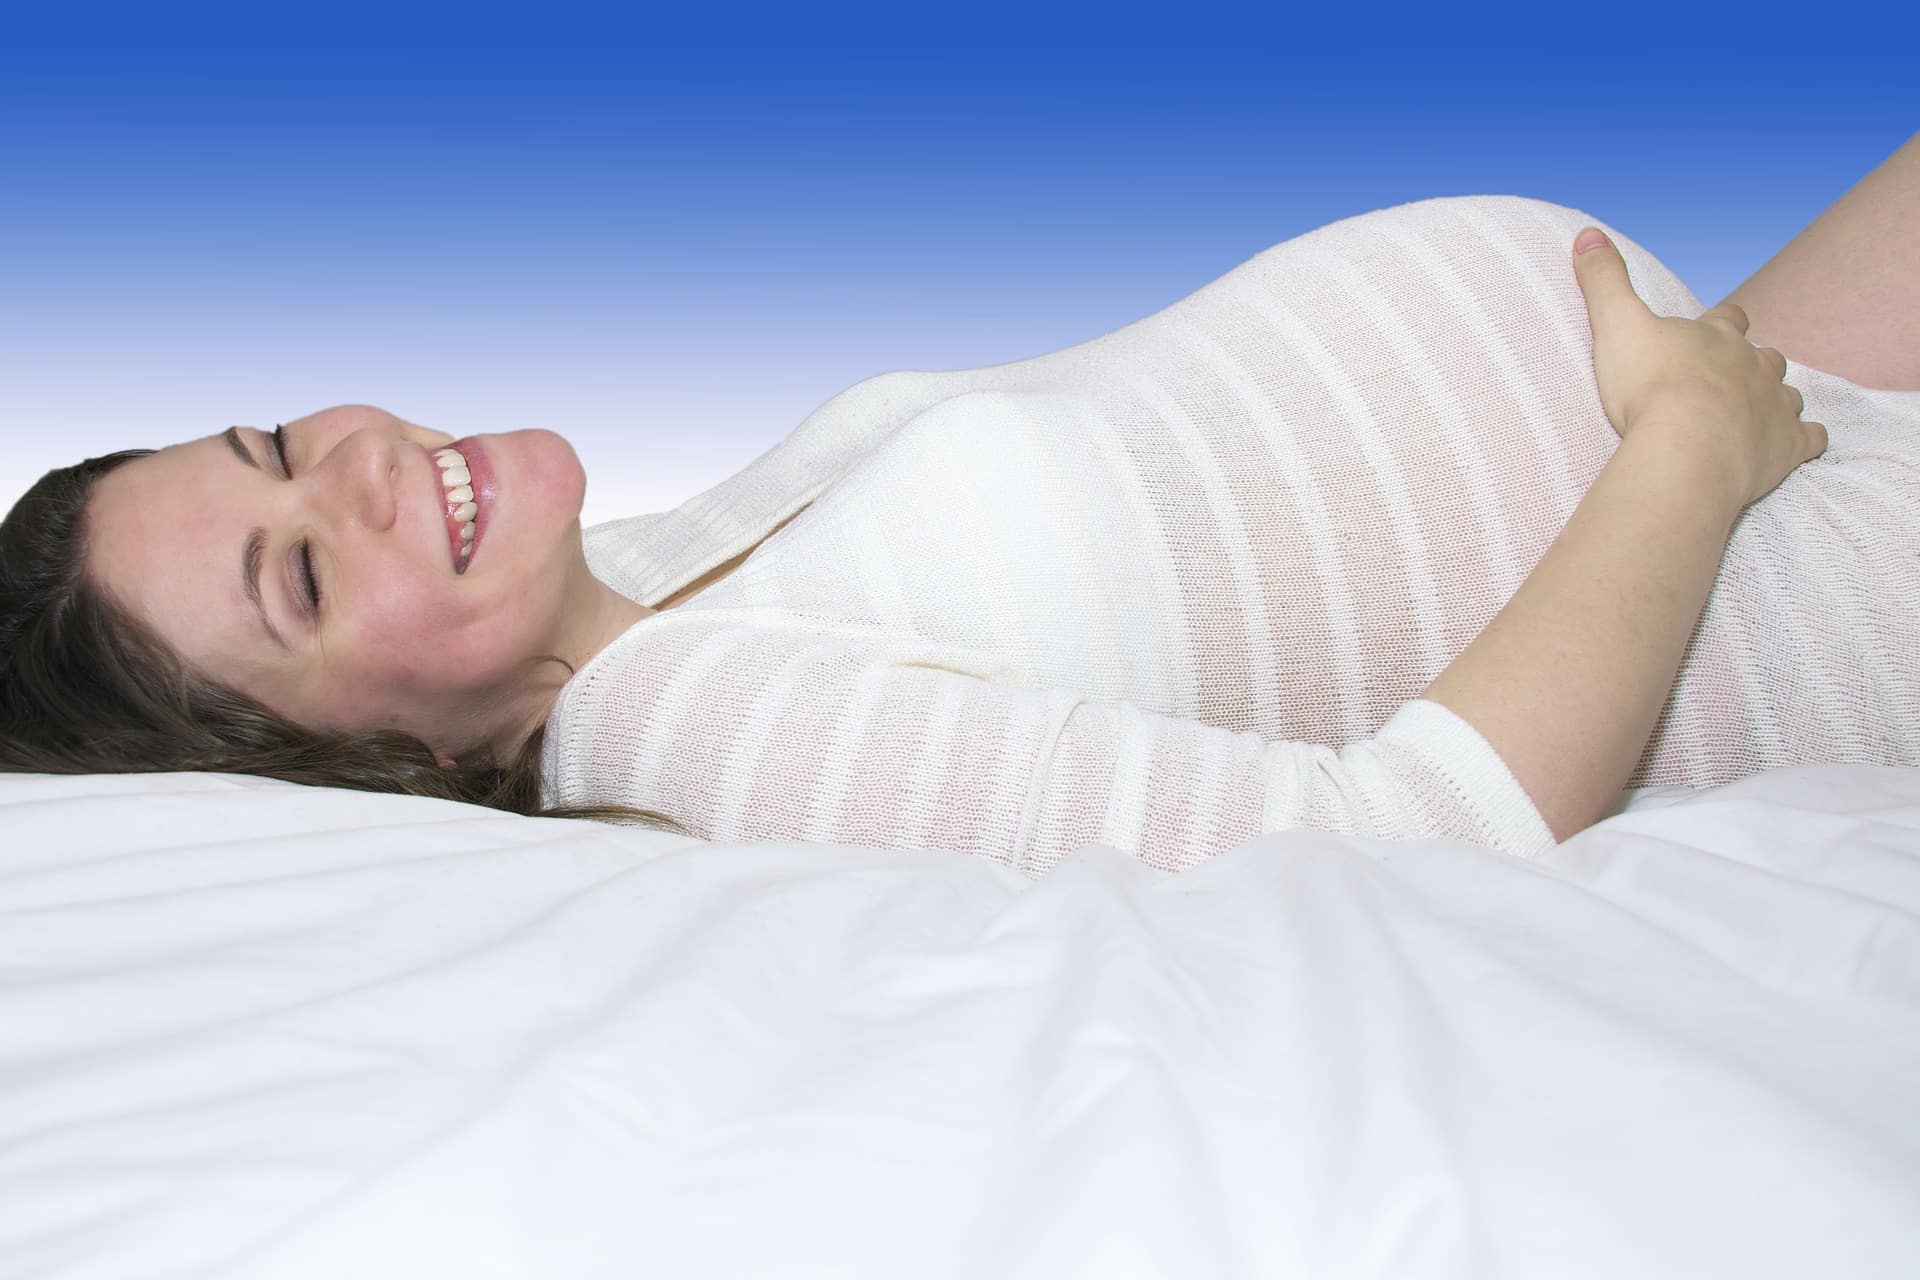 How can massage affect pregnancy